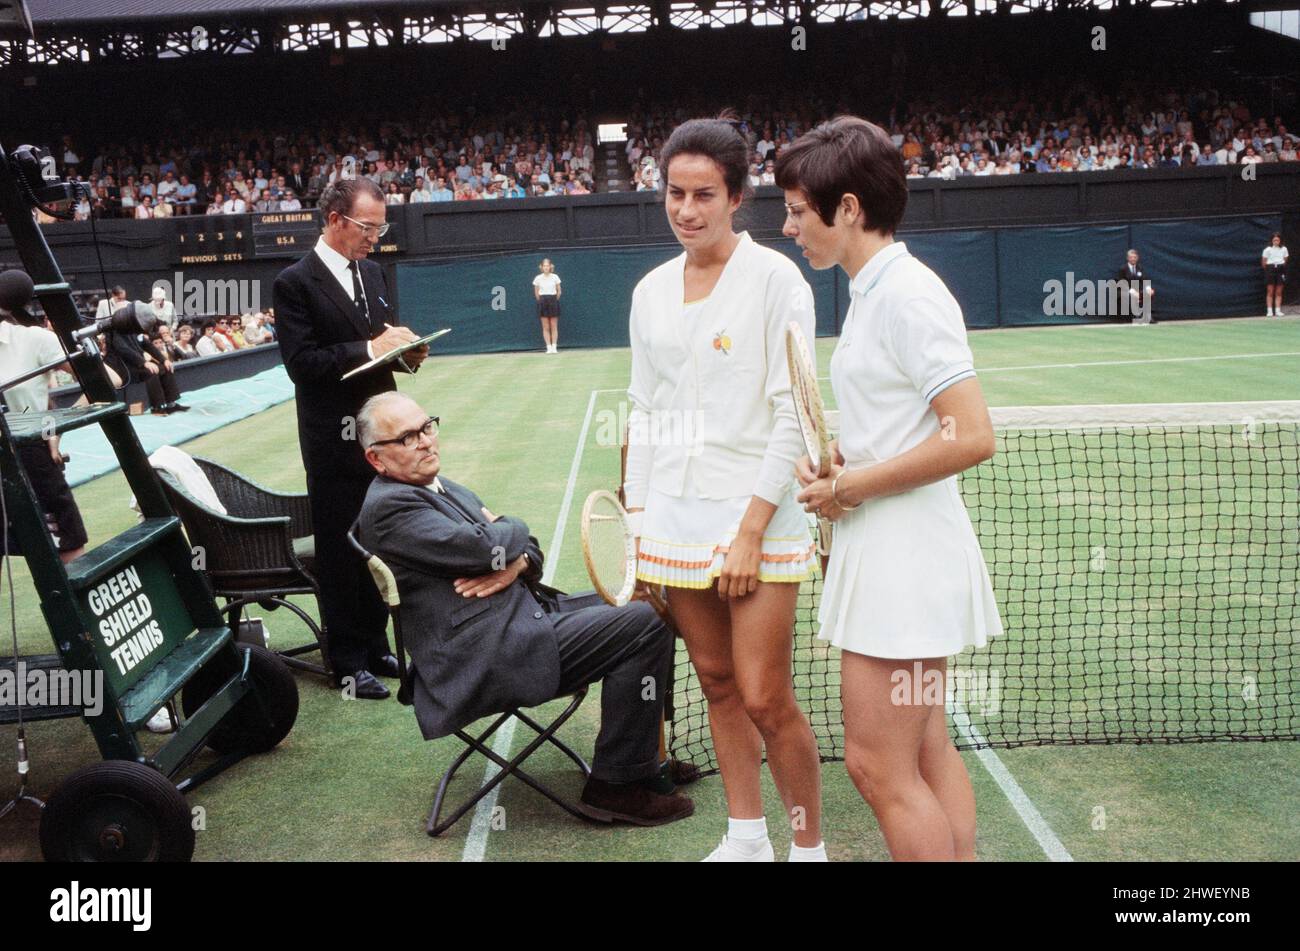 The 1970 Wightman Cup was the 42nd edition of the annual women's team tennis competition between the United States and Great Britain. It was held at the All England Lawn Tennis and Croquet Club in London in England in the United Kingdom.The United States of America beat Great Britain 4-3. (Picture) Virginia Wade (left) and Billie Jean King. Circa June 1970 Stock Photo